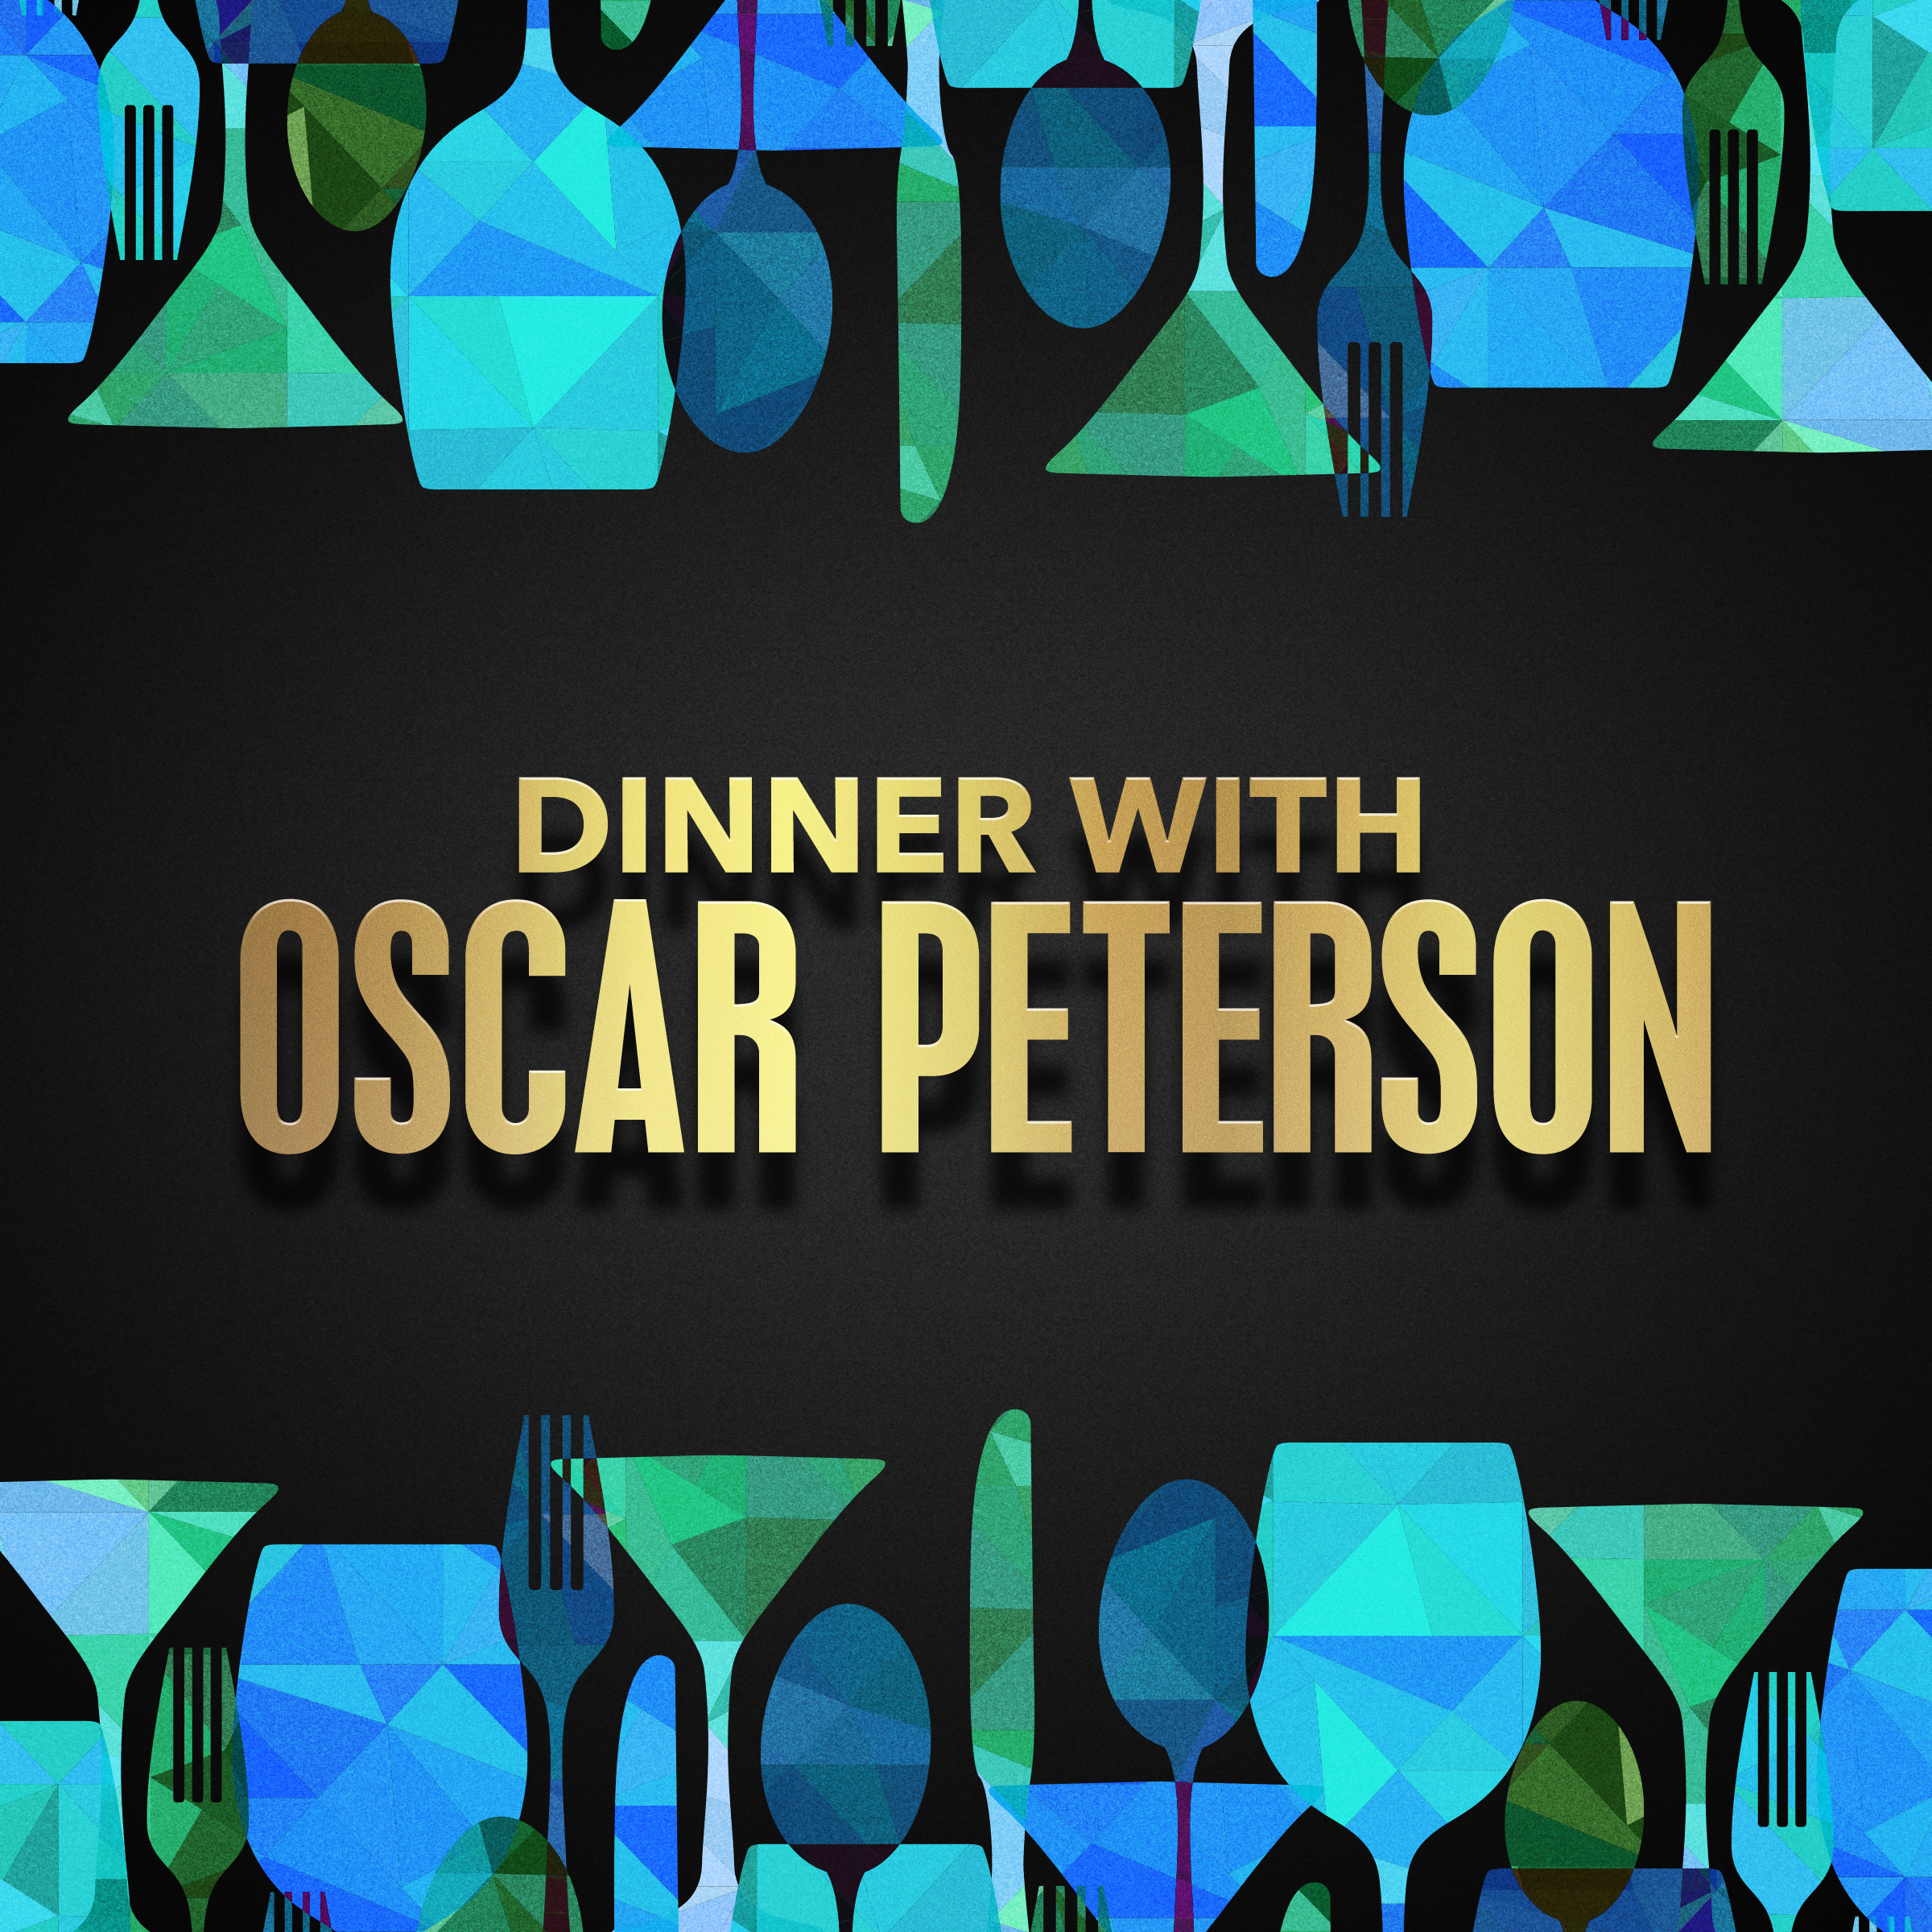 Dinner with Oscar Peterson